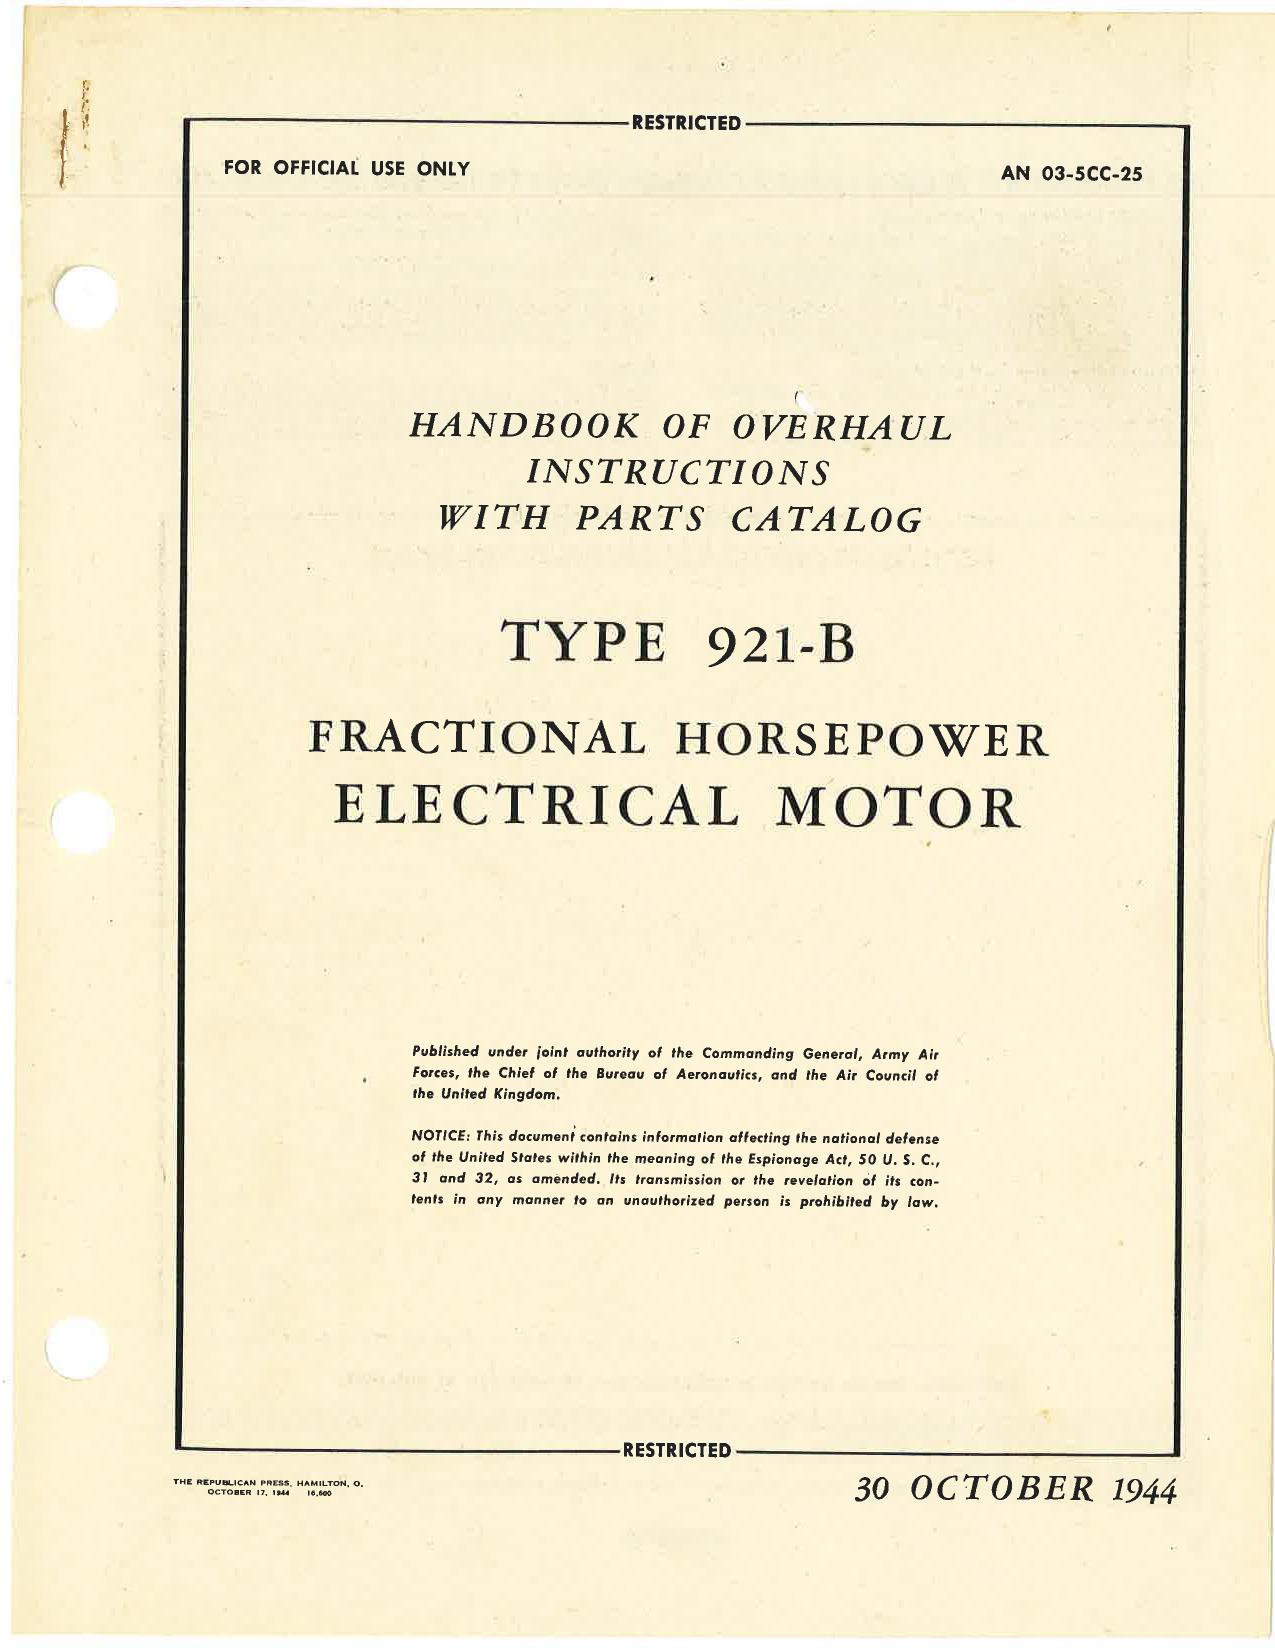 Sample page 1 from AirCorps Library document: Overhaul Instructions with Parts Catalog for Type 921-B Fractional Horsepower Electrical Motor